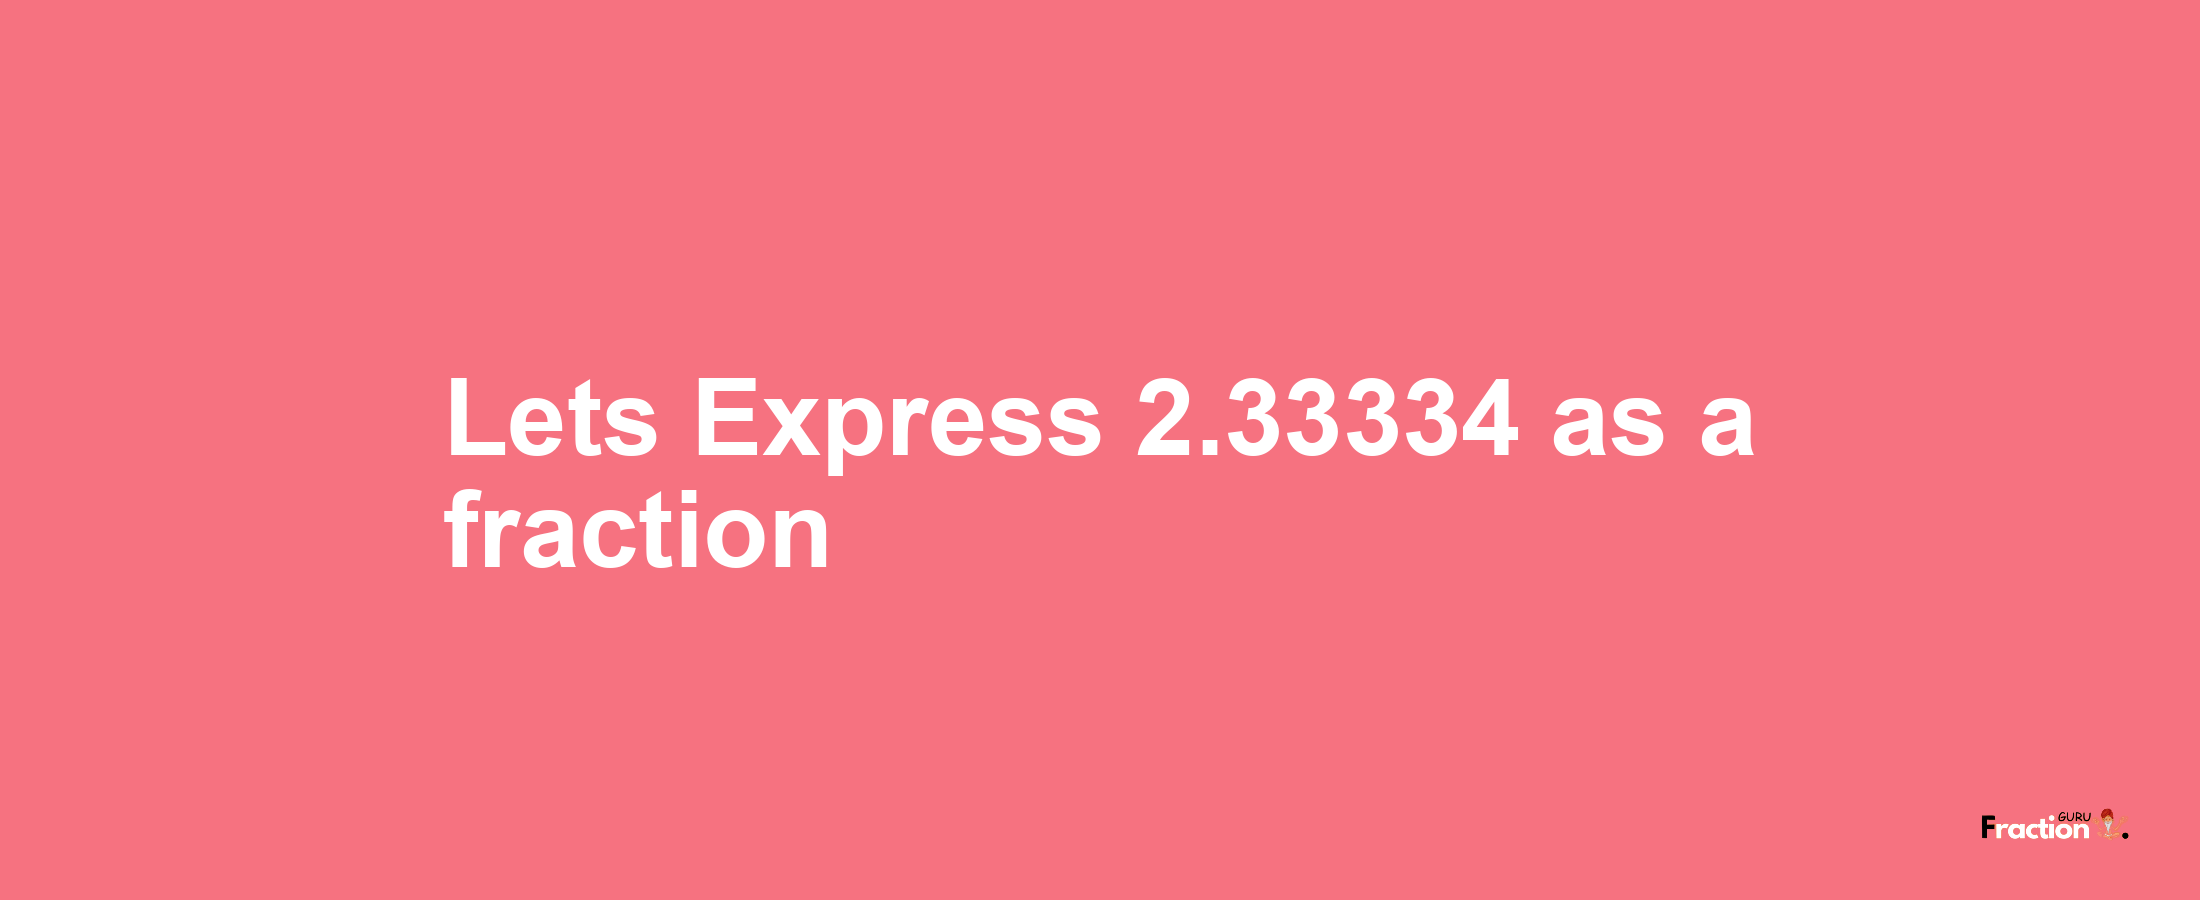 Lets Express 2.33334 as afraction